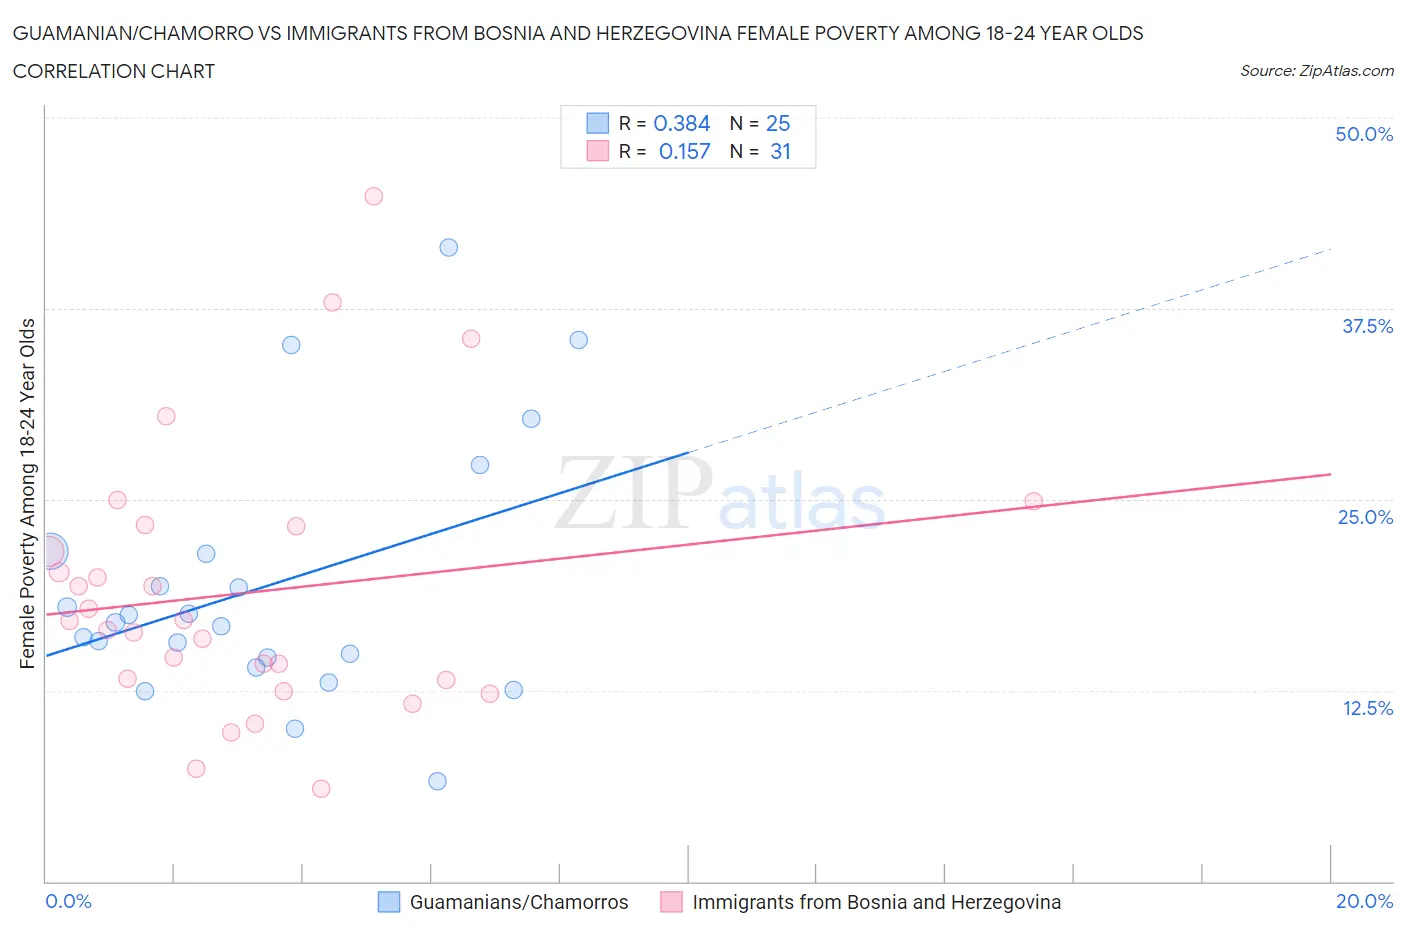 Guamanian/Chamorro vs Immigrants from Bosnia and Herzegovina Female Poverty Among 18-24 Year Olds